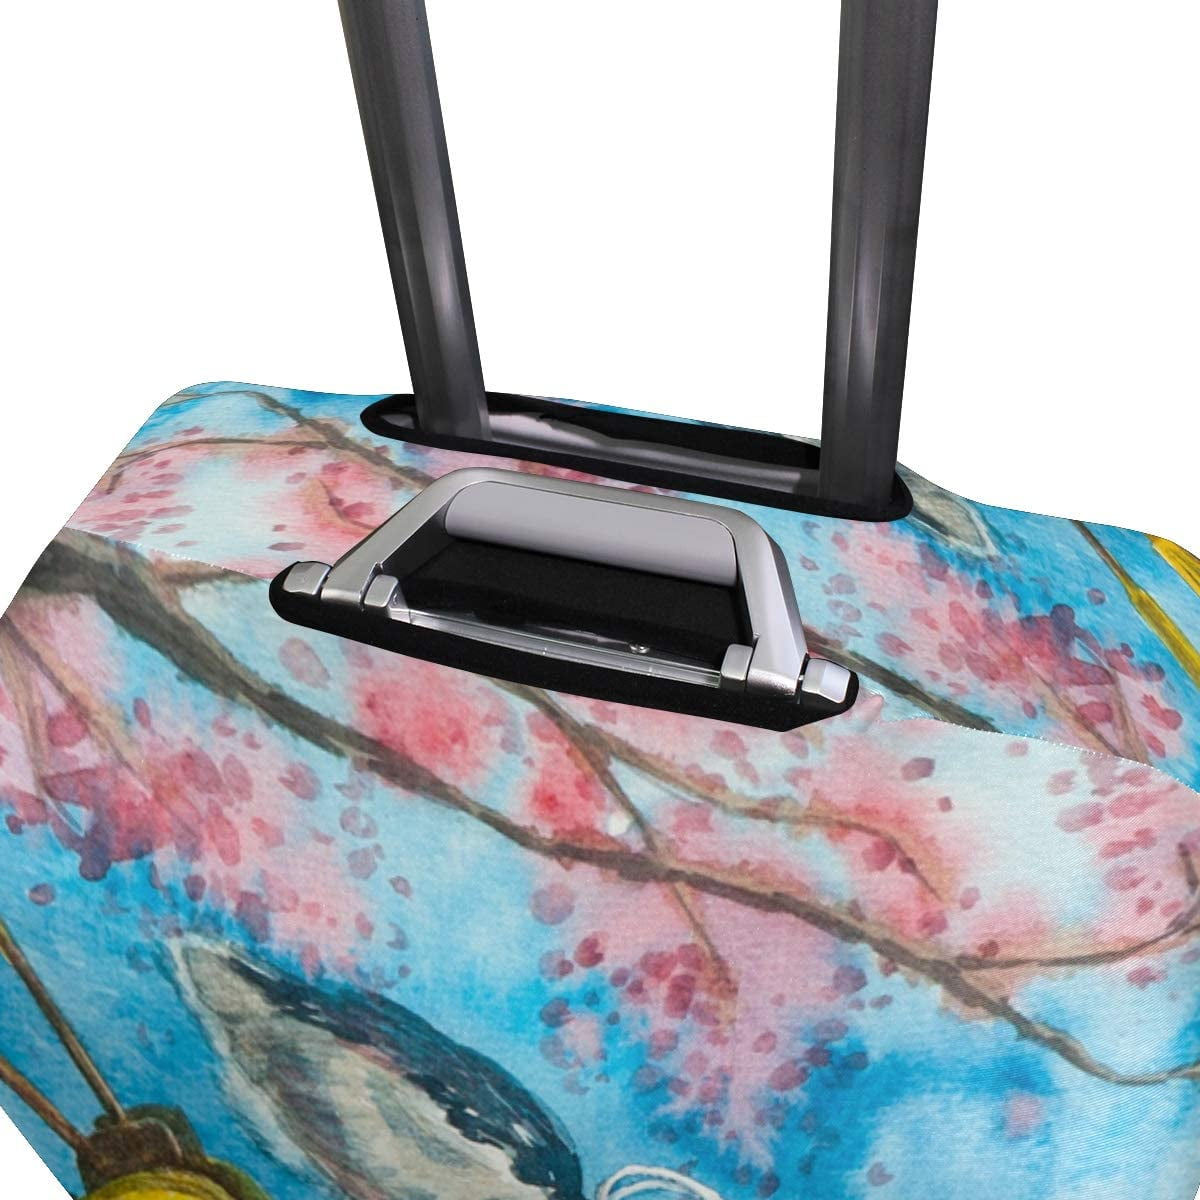 Travel Luggage Cover Suitcase Protector Fits 22-24 inch Luggage Abstract Hand Painted Watercolor